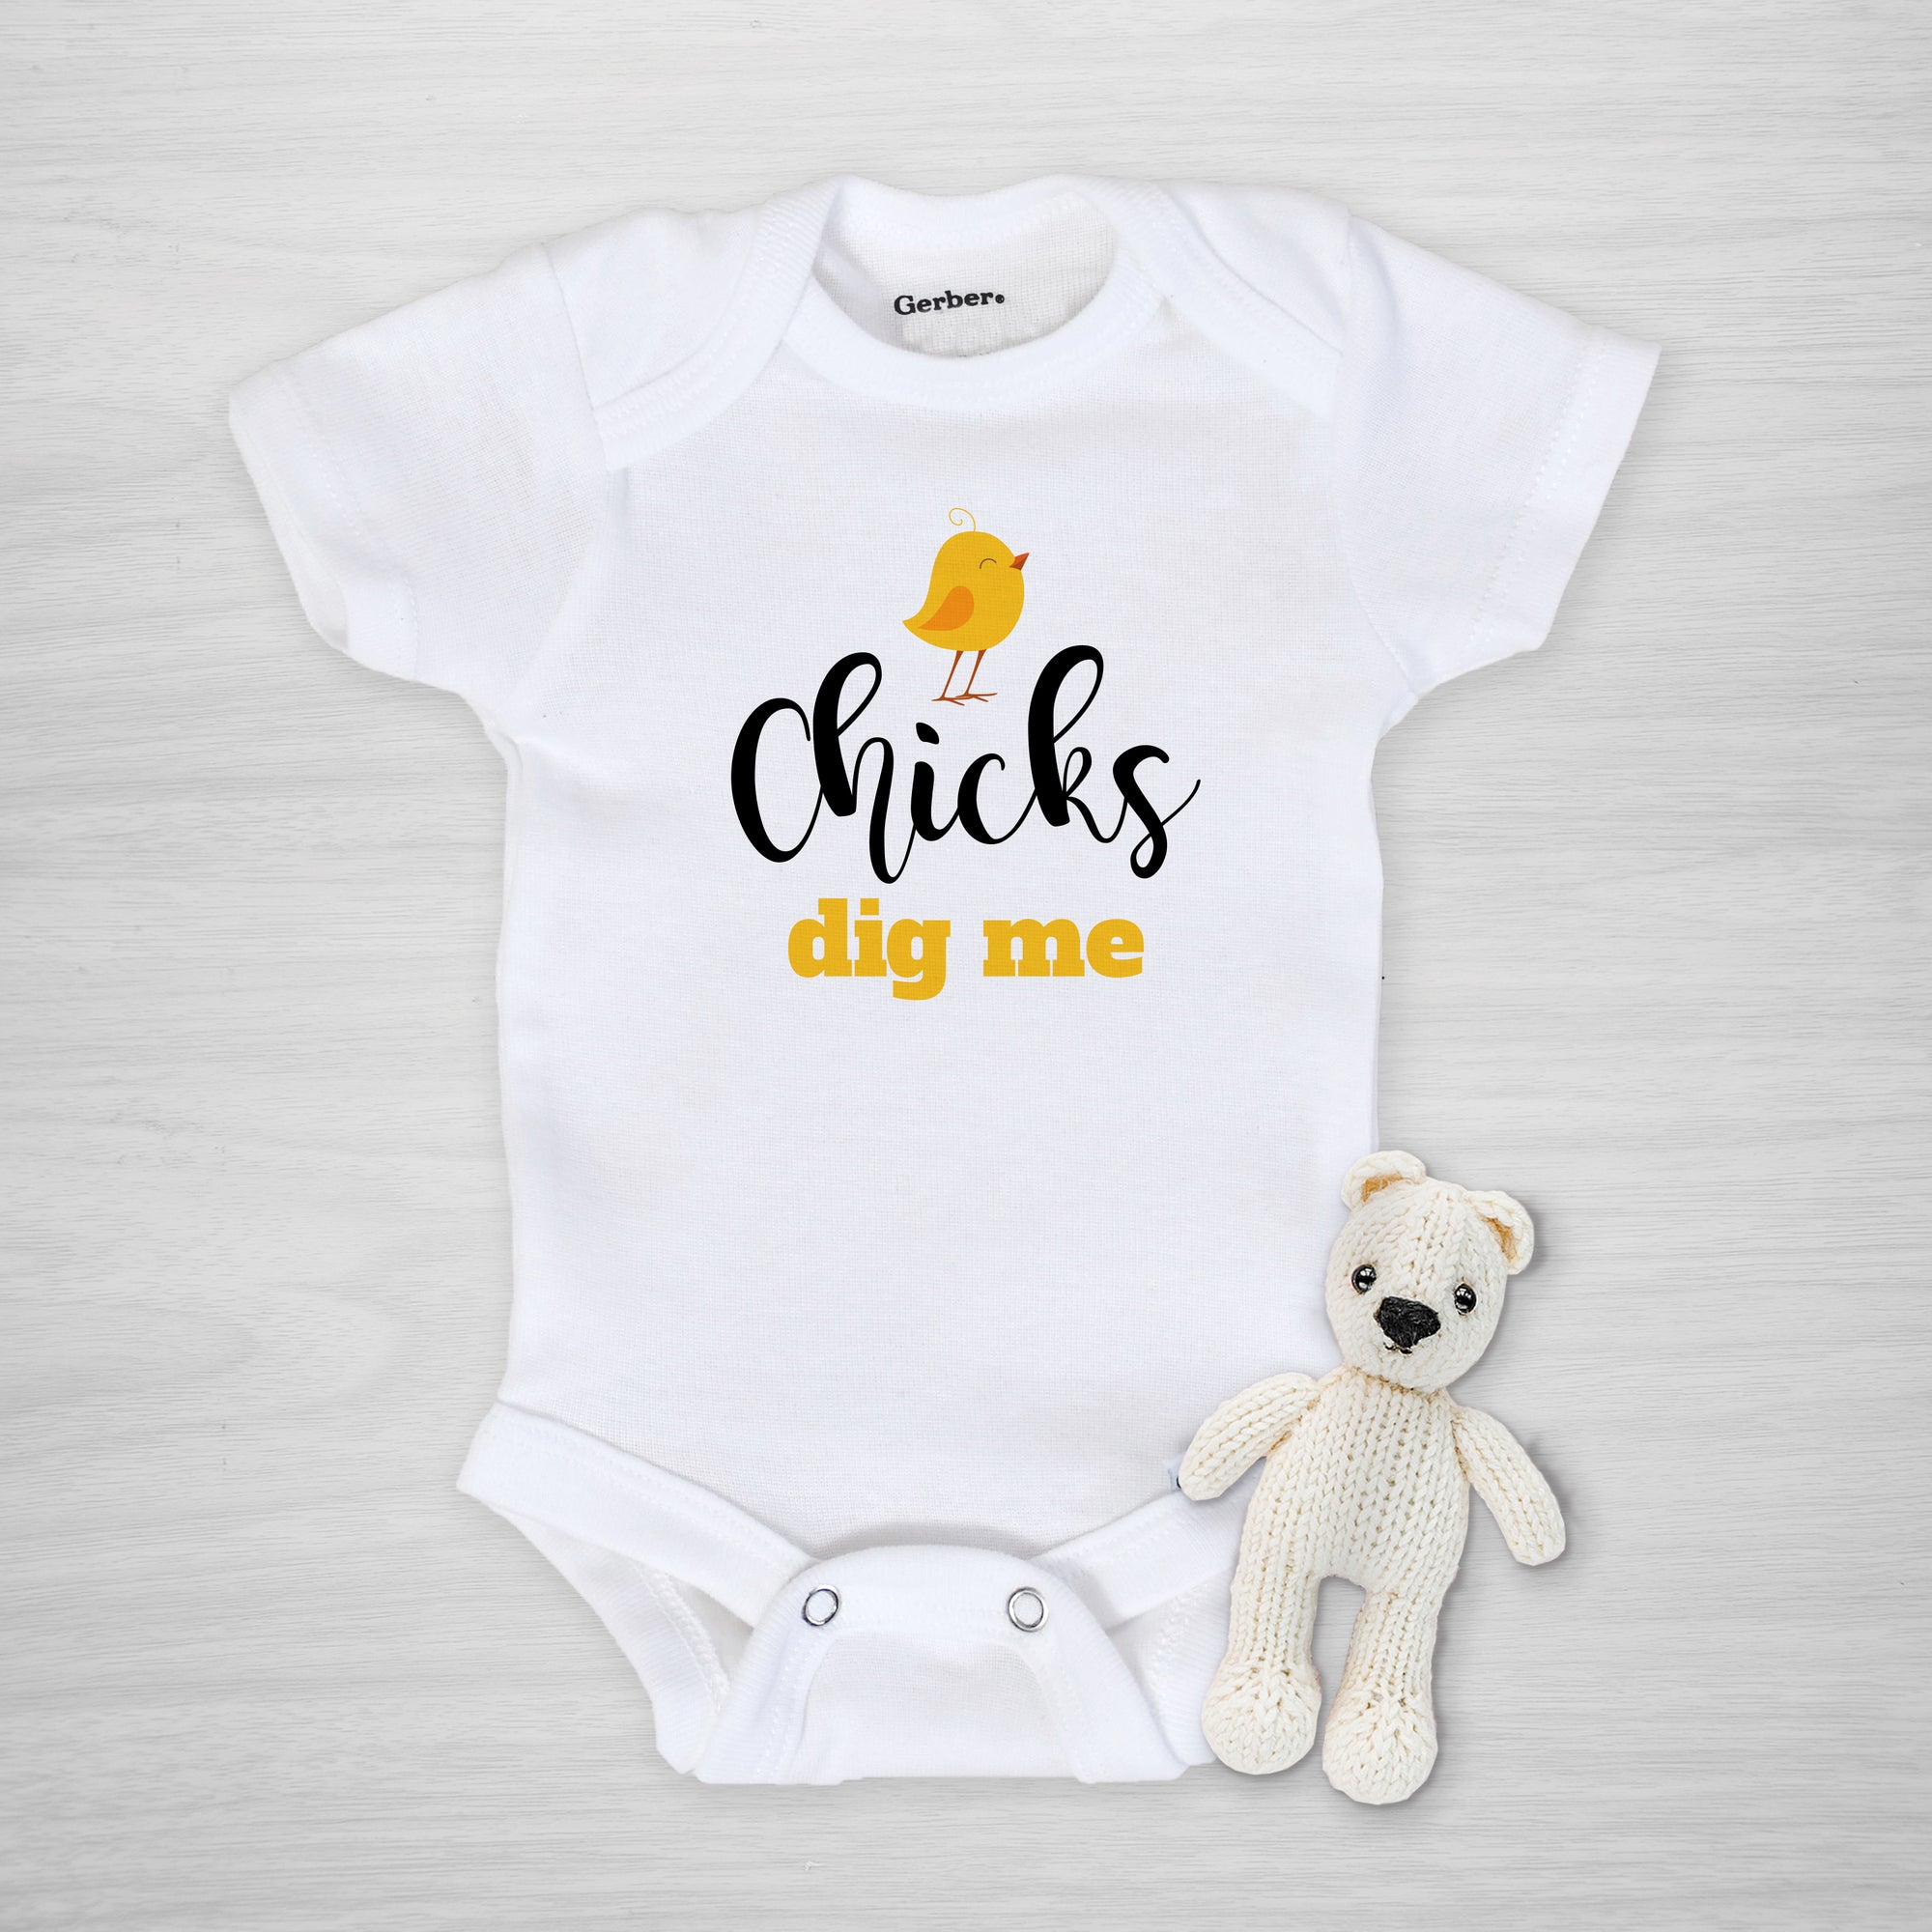 Chicks Dig Me Adorable Gerber Onesie - Perfect for Easter, long sleeved